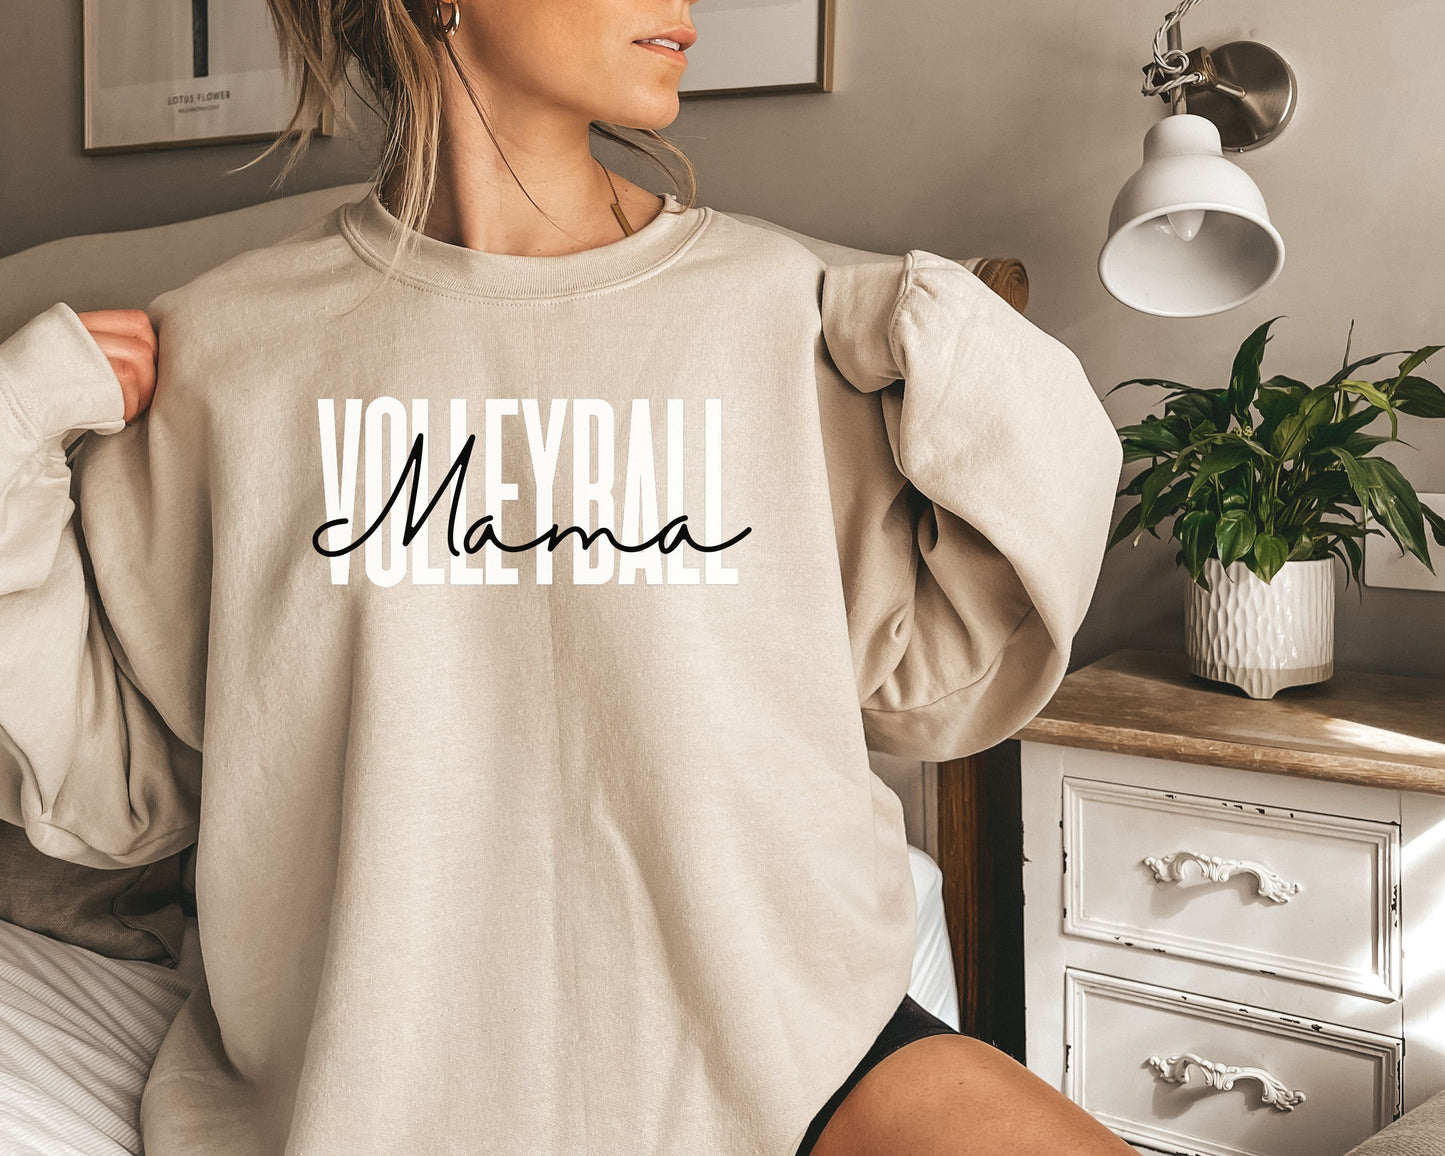 Volleyball mama Unisex Sweatshirt, mother of volleyball Crewneck Sand-Family-Gift-Planet